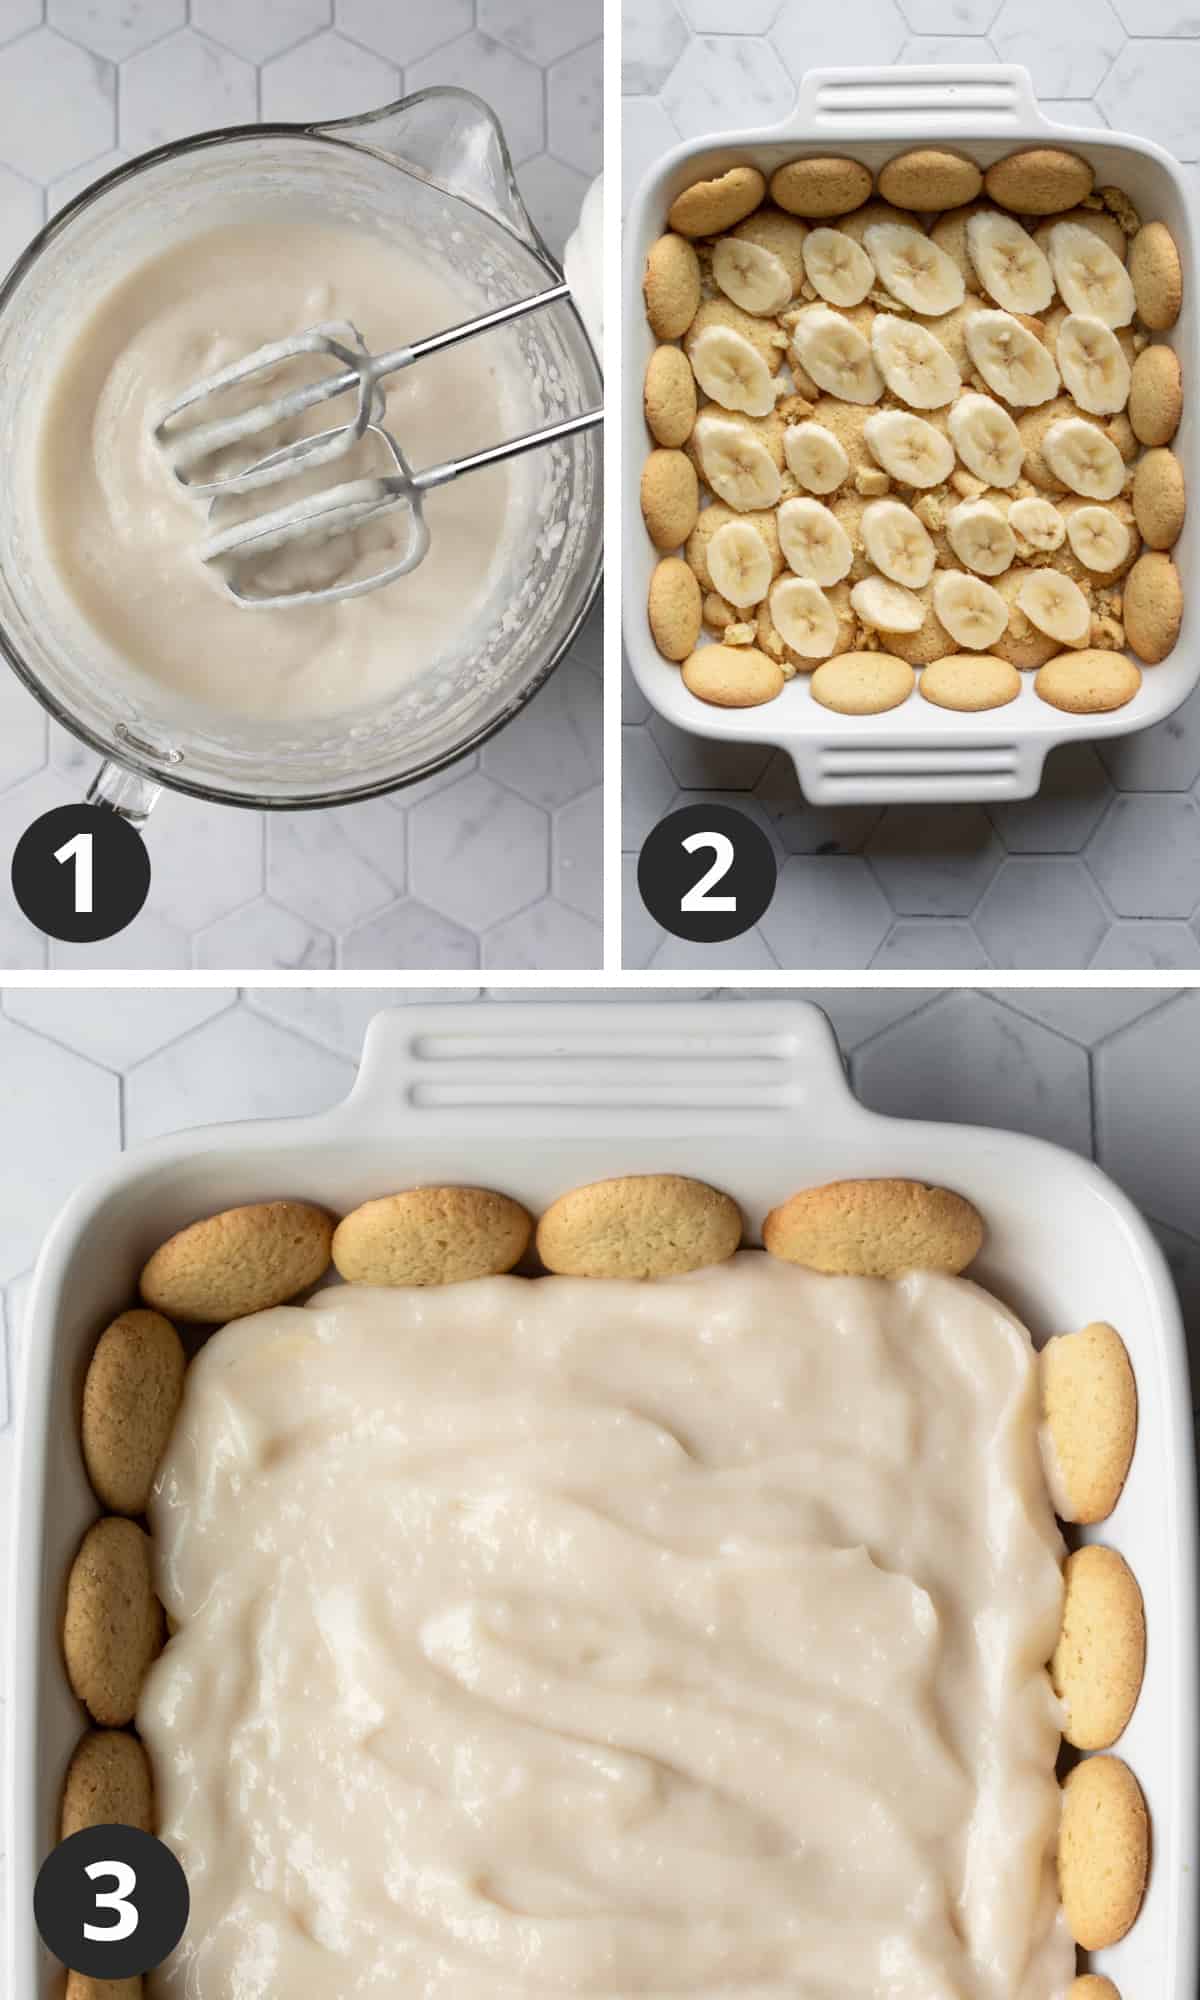 a 3-photo collage showing the stages of assembling banana pudding.